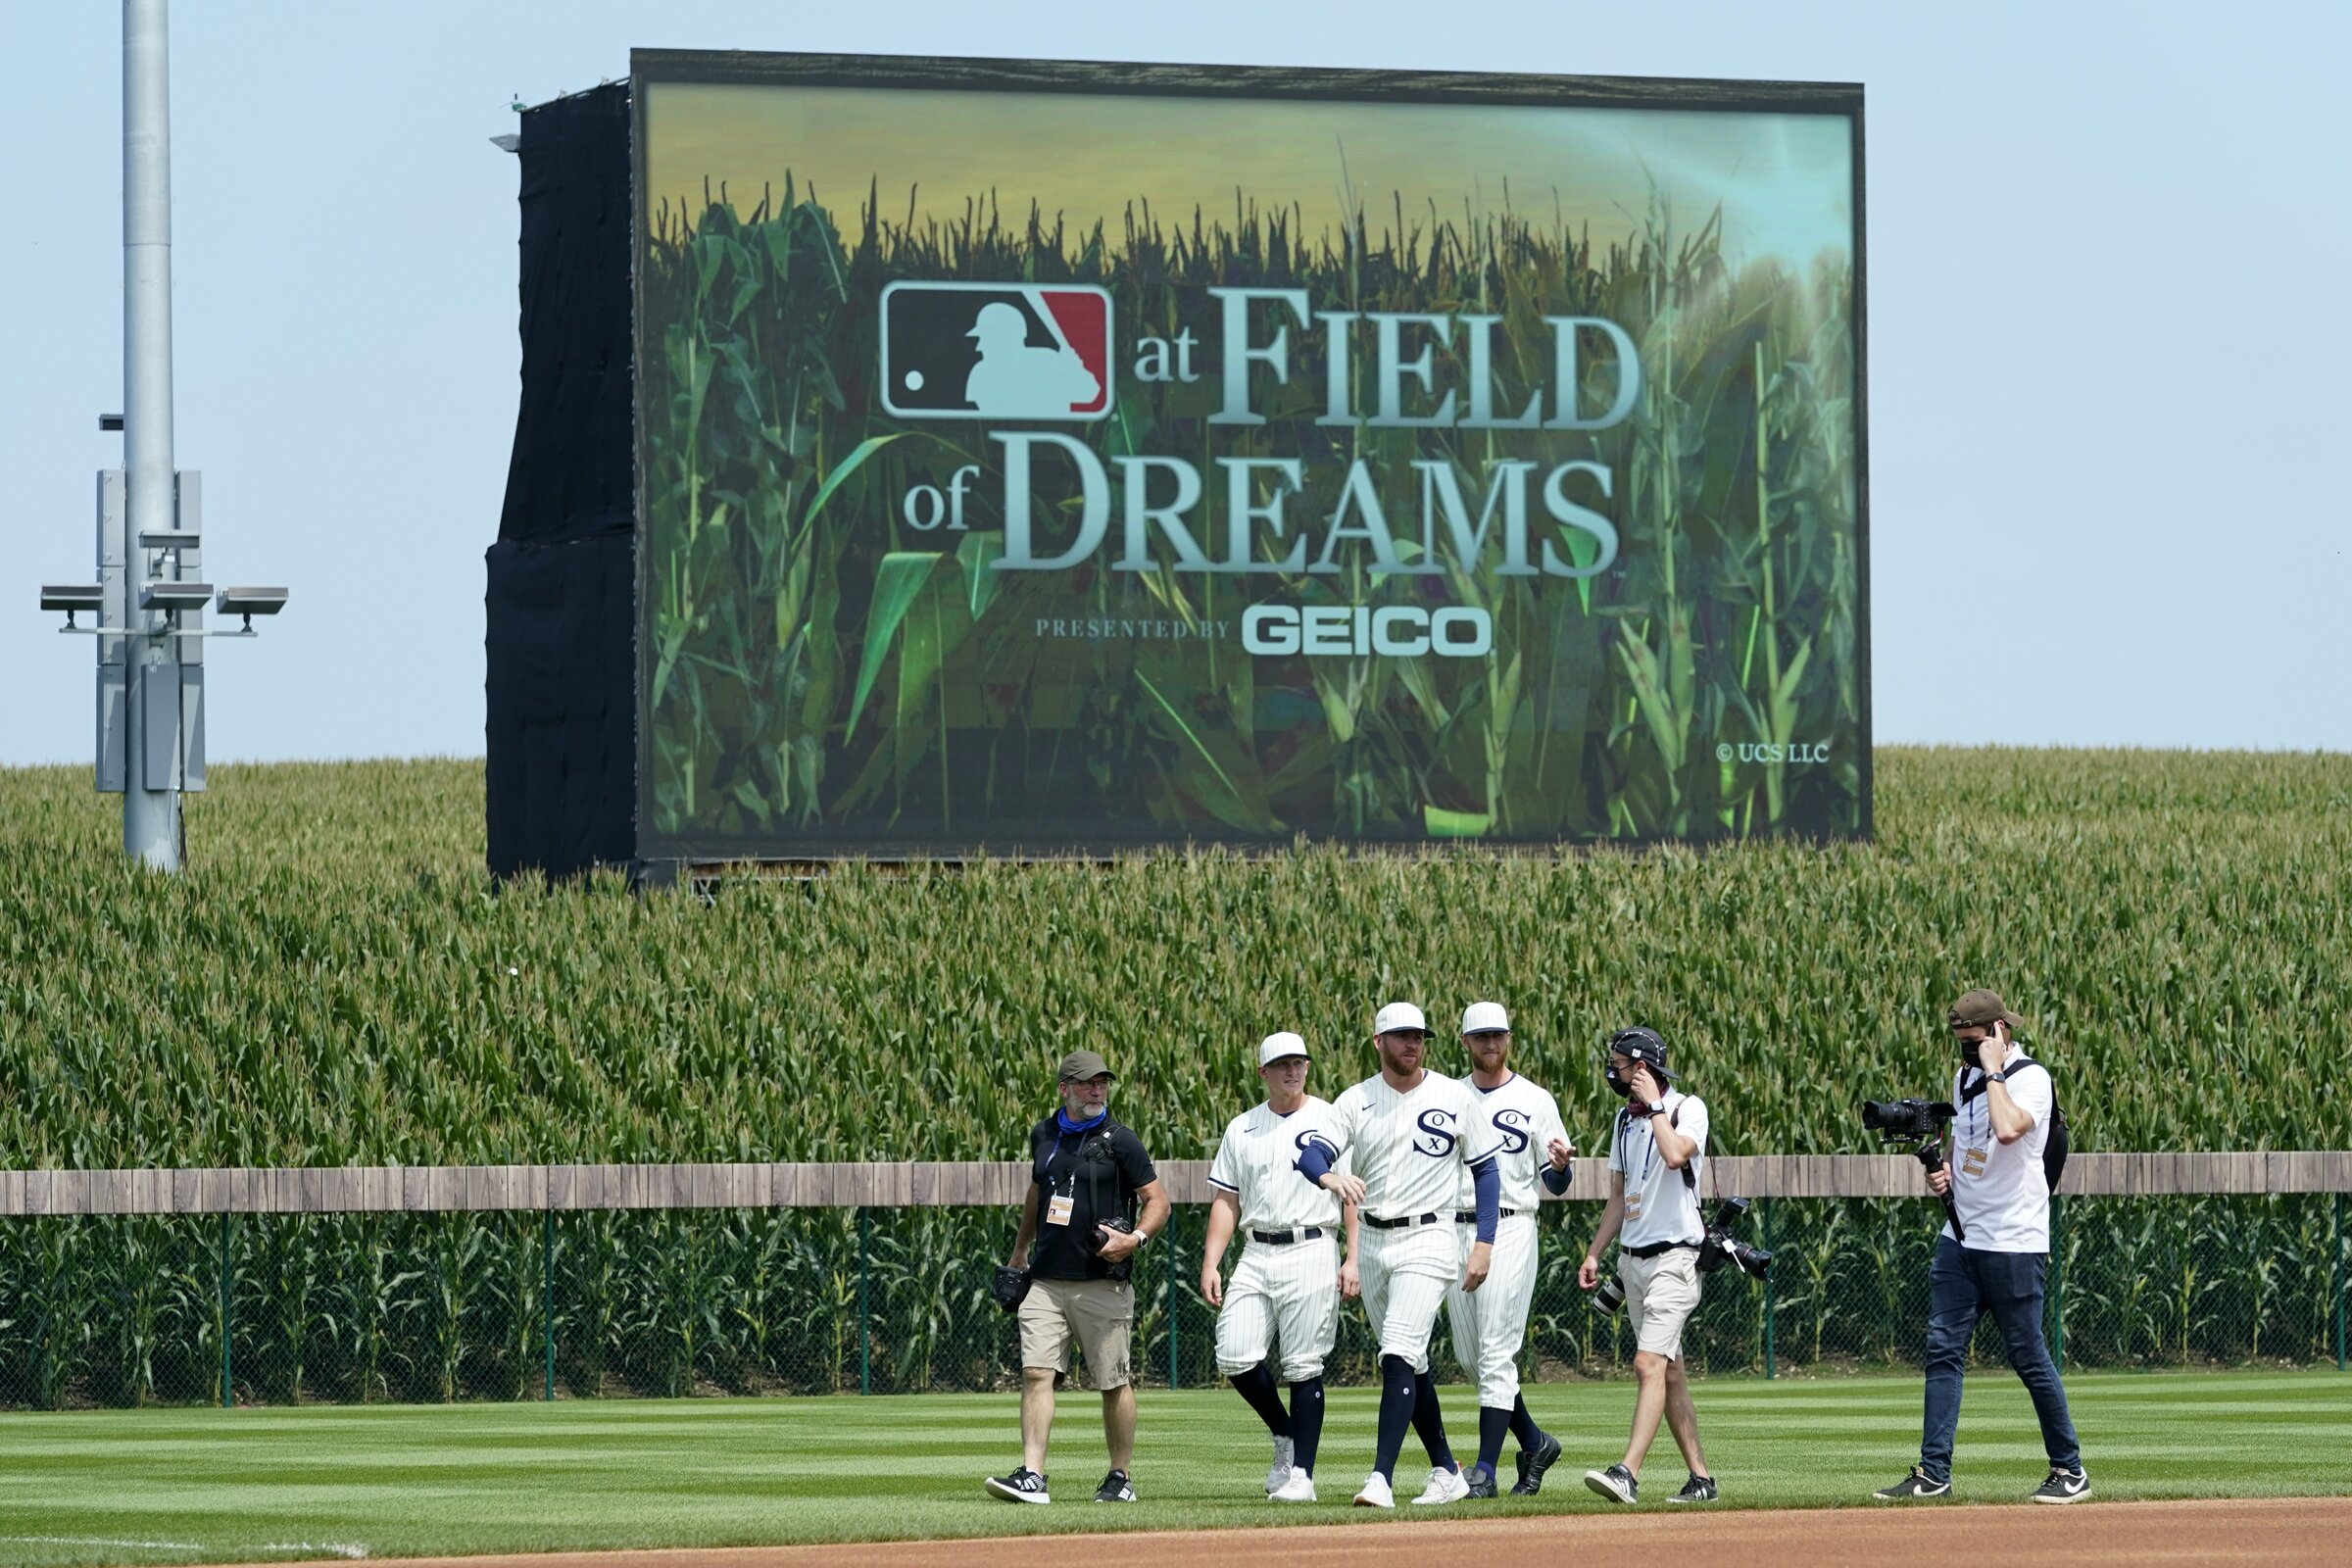 Drew Smyly leads Chicago Cubs past Cincinnati Reds in 2nd Field of Dreams  Game in Iowa 